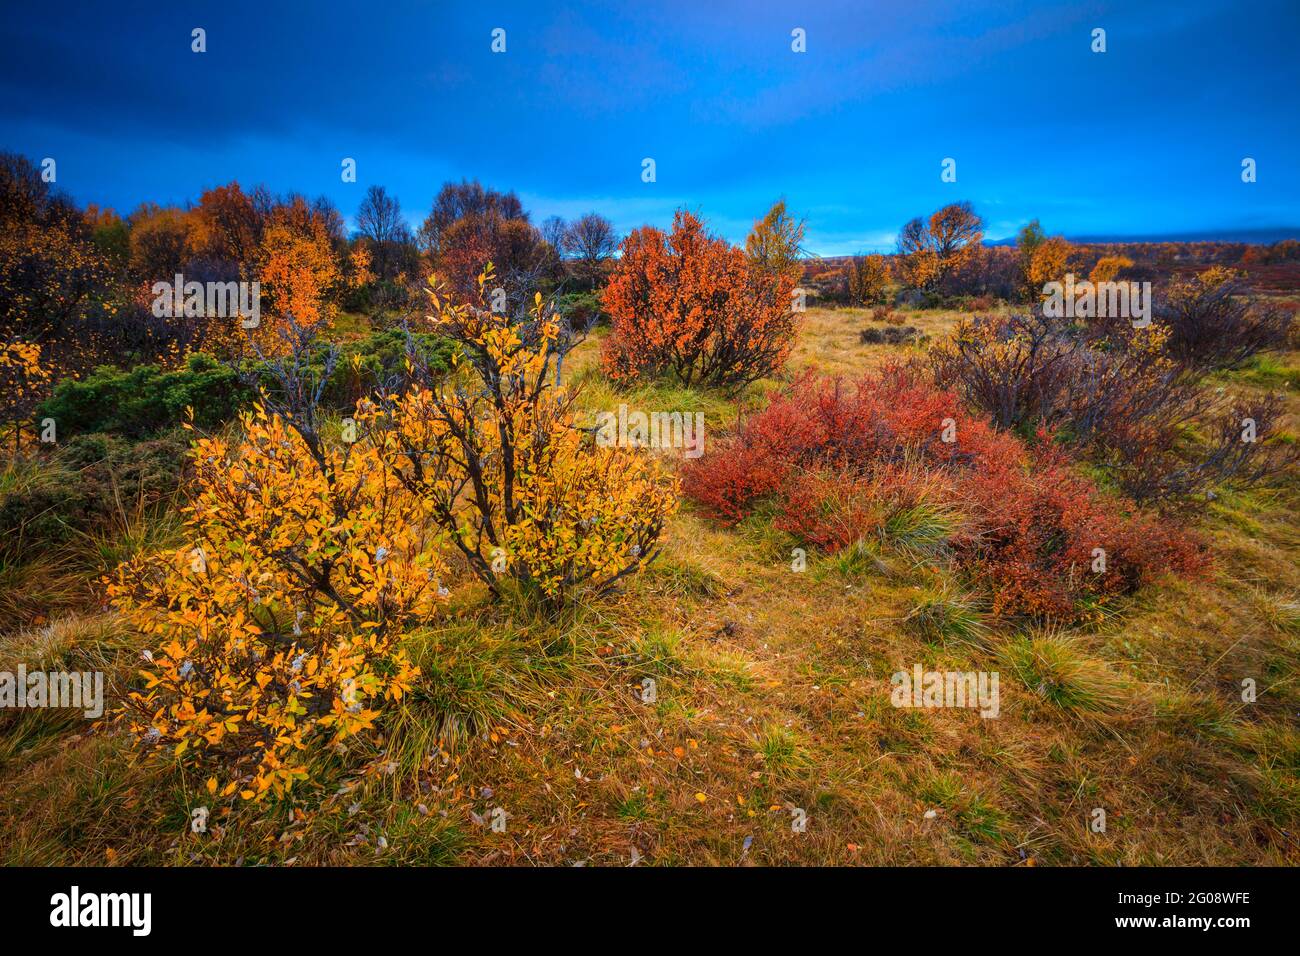 Colorful autumn foliage in September evening light at Fokstumyra nature reserve, Dovre, Norway, Scandinavia. Stock Photo